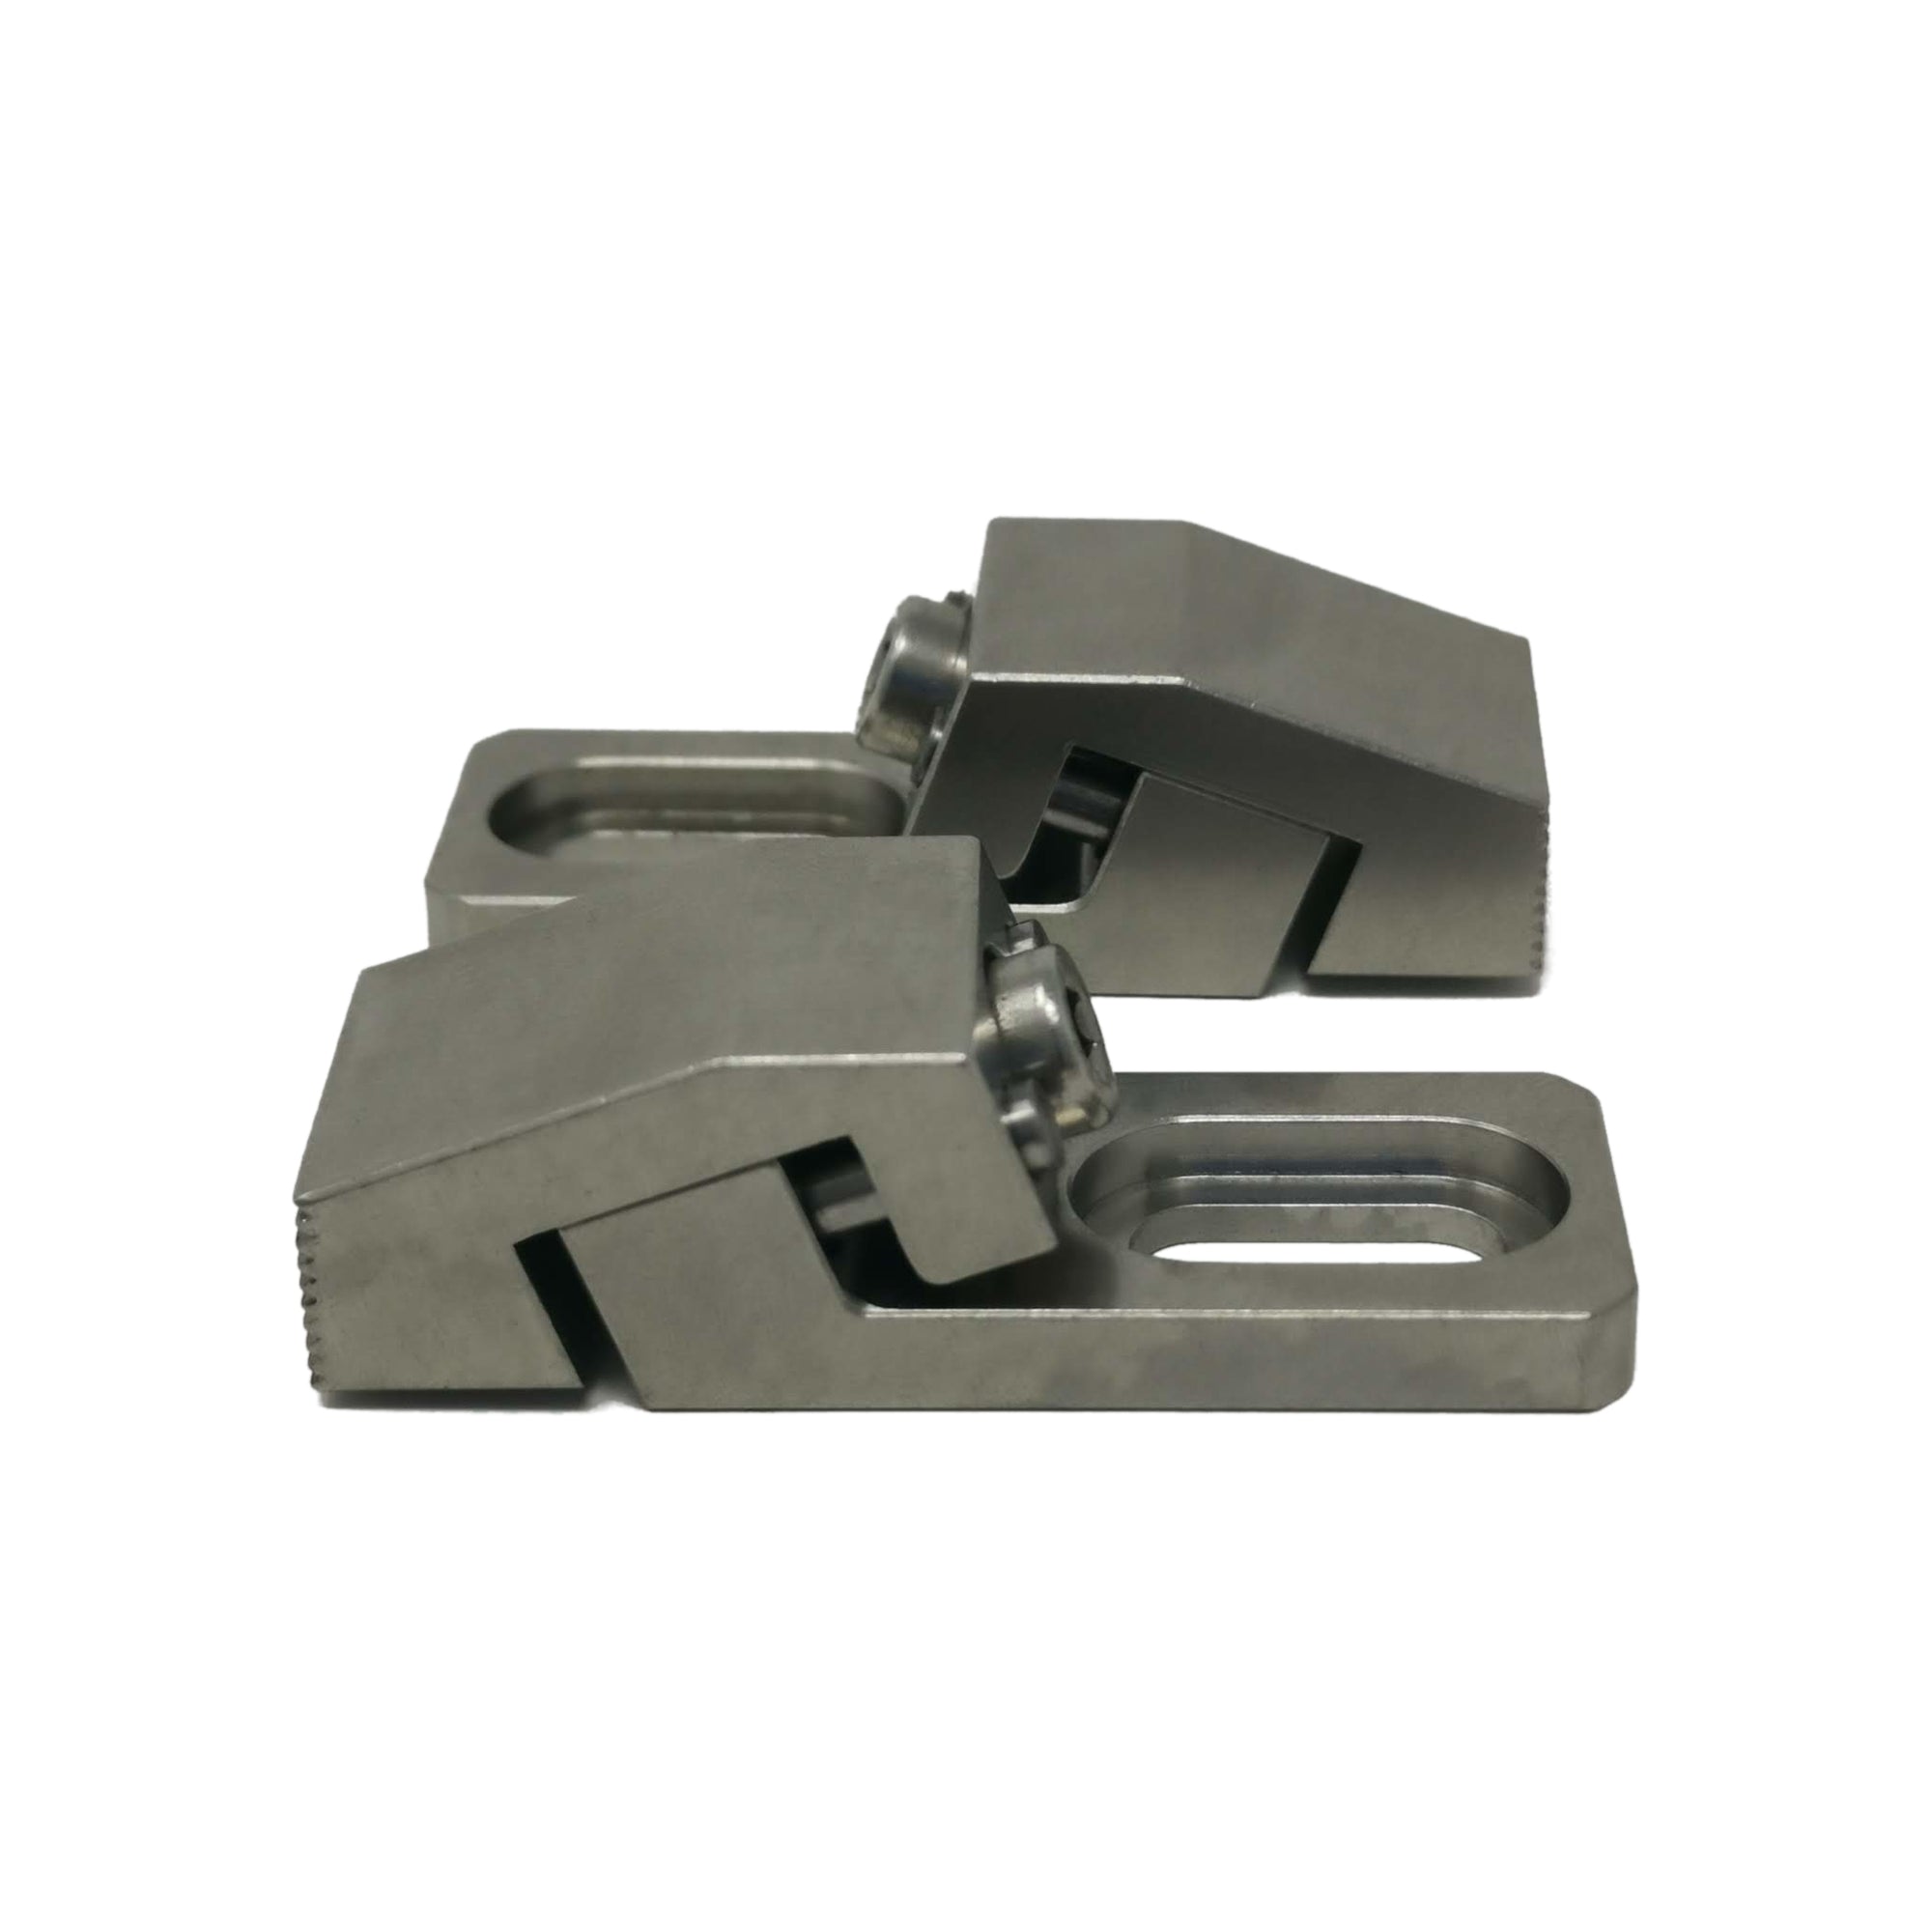 Tiger Claw Clamps